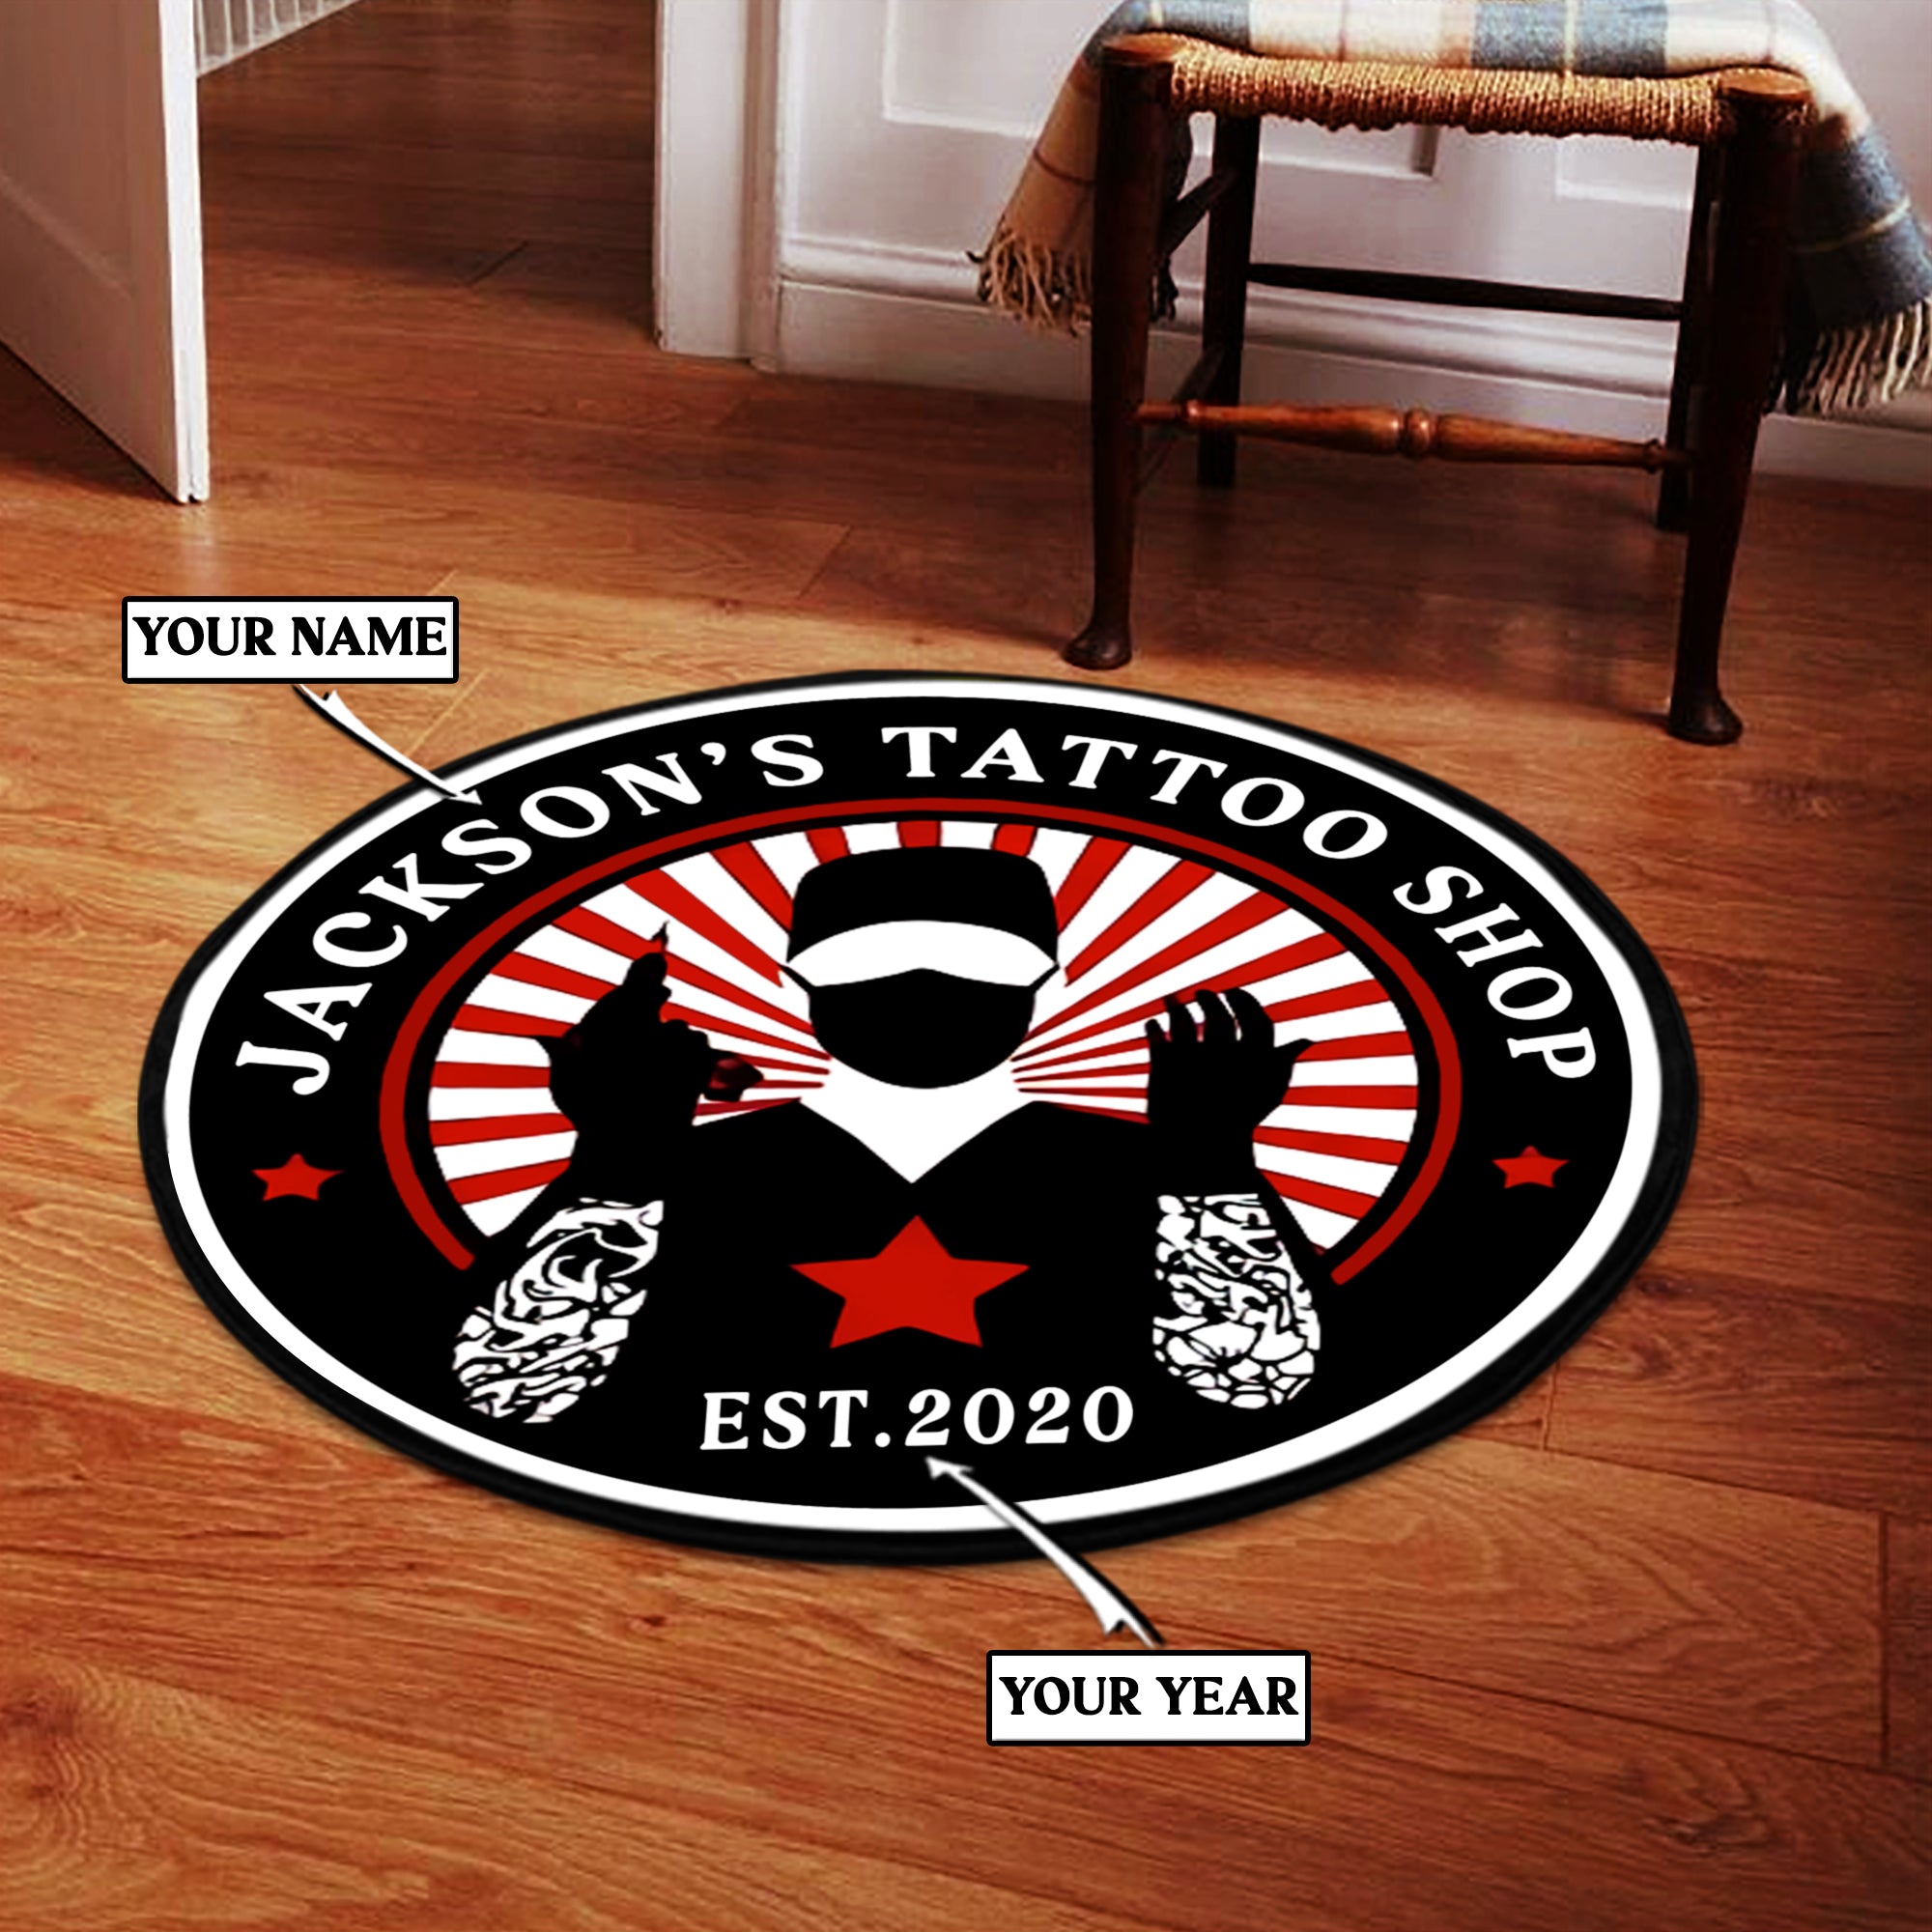 Personalized Tattoo Shop Round Rug 08327